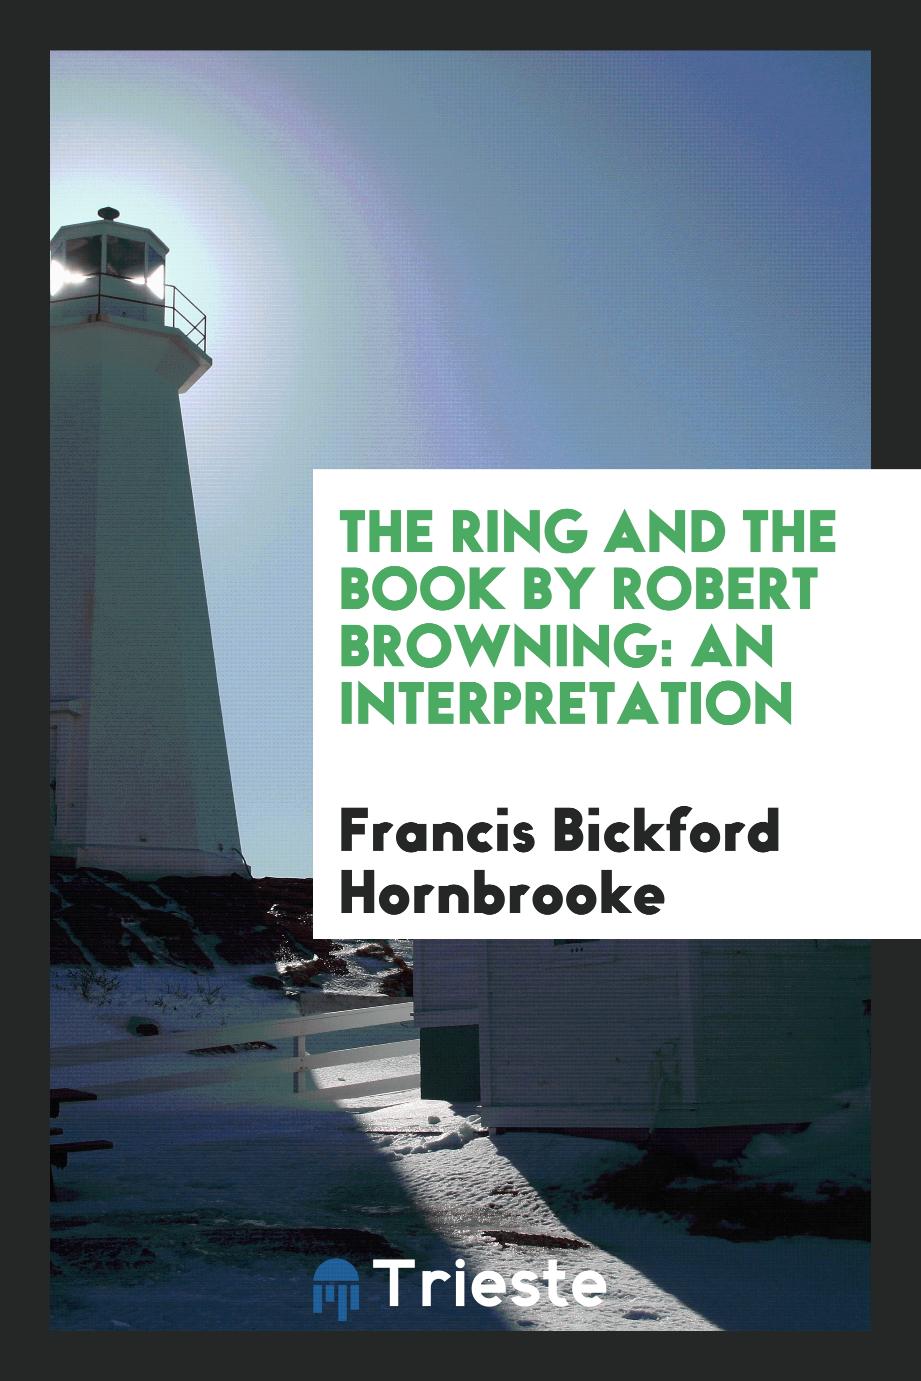 The ring and the book by Robert Browning: an interpretation